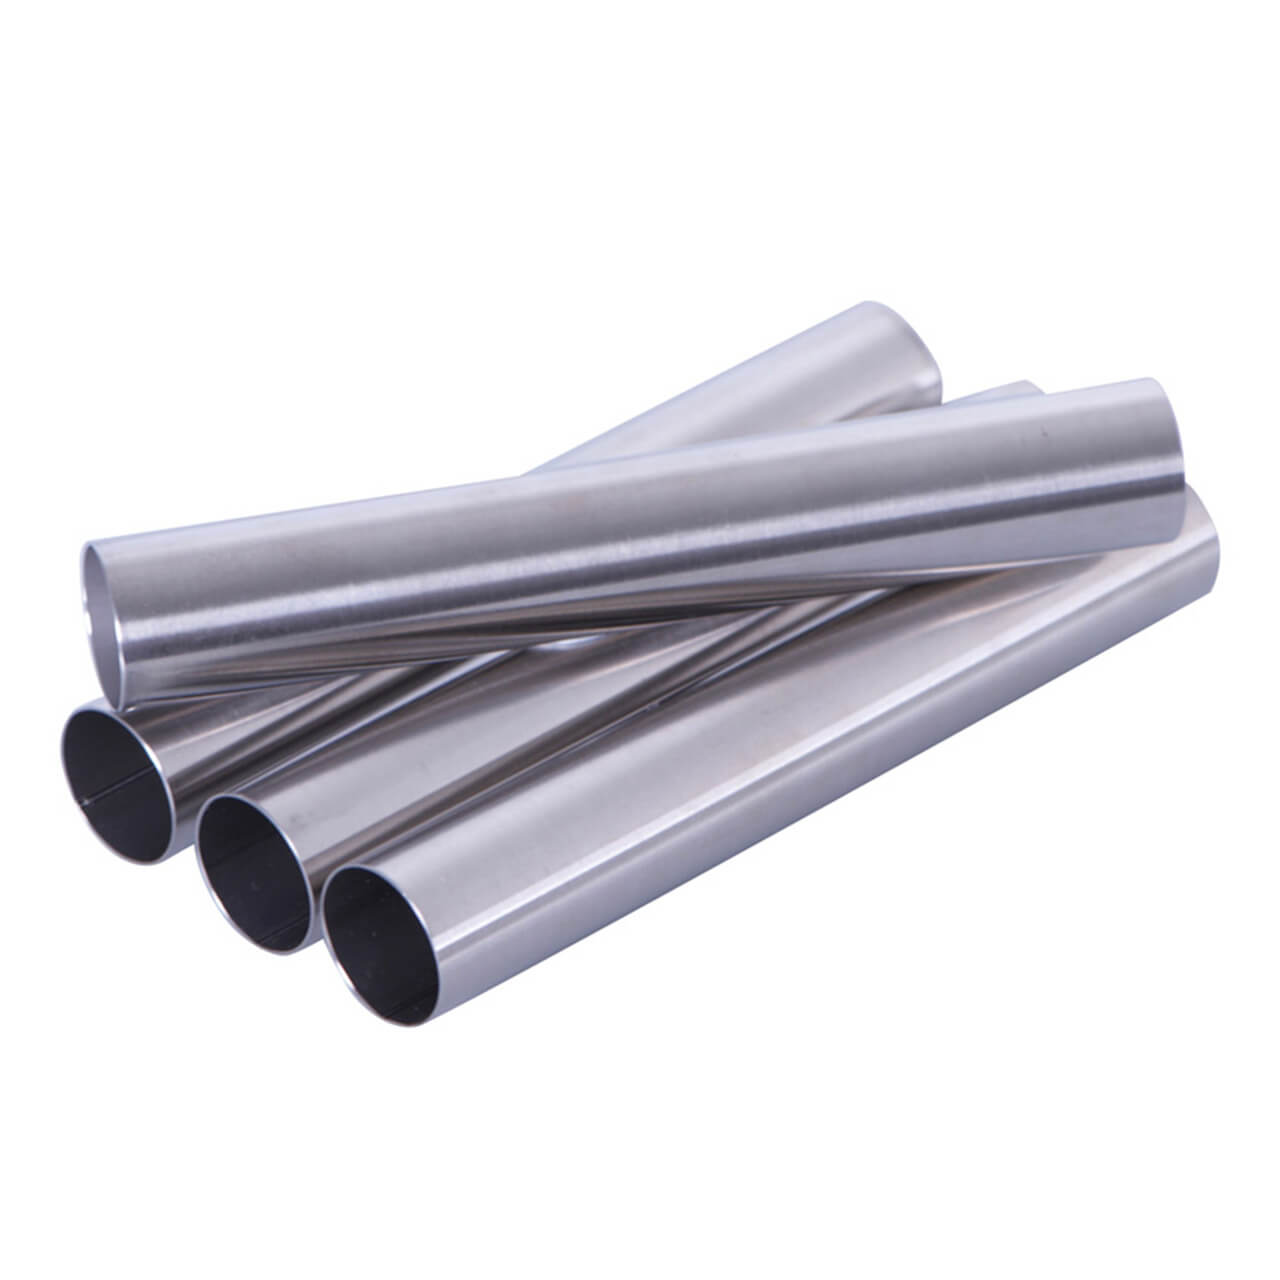 Stainless Steel Cannoli Tubes Set of 4